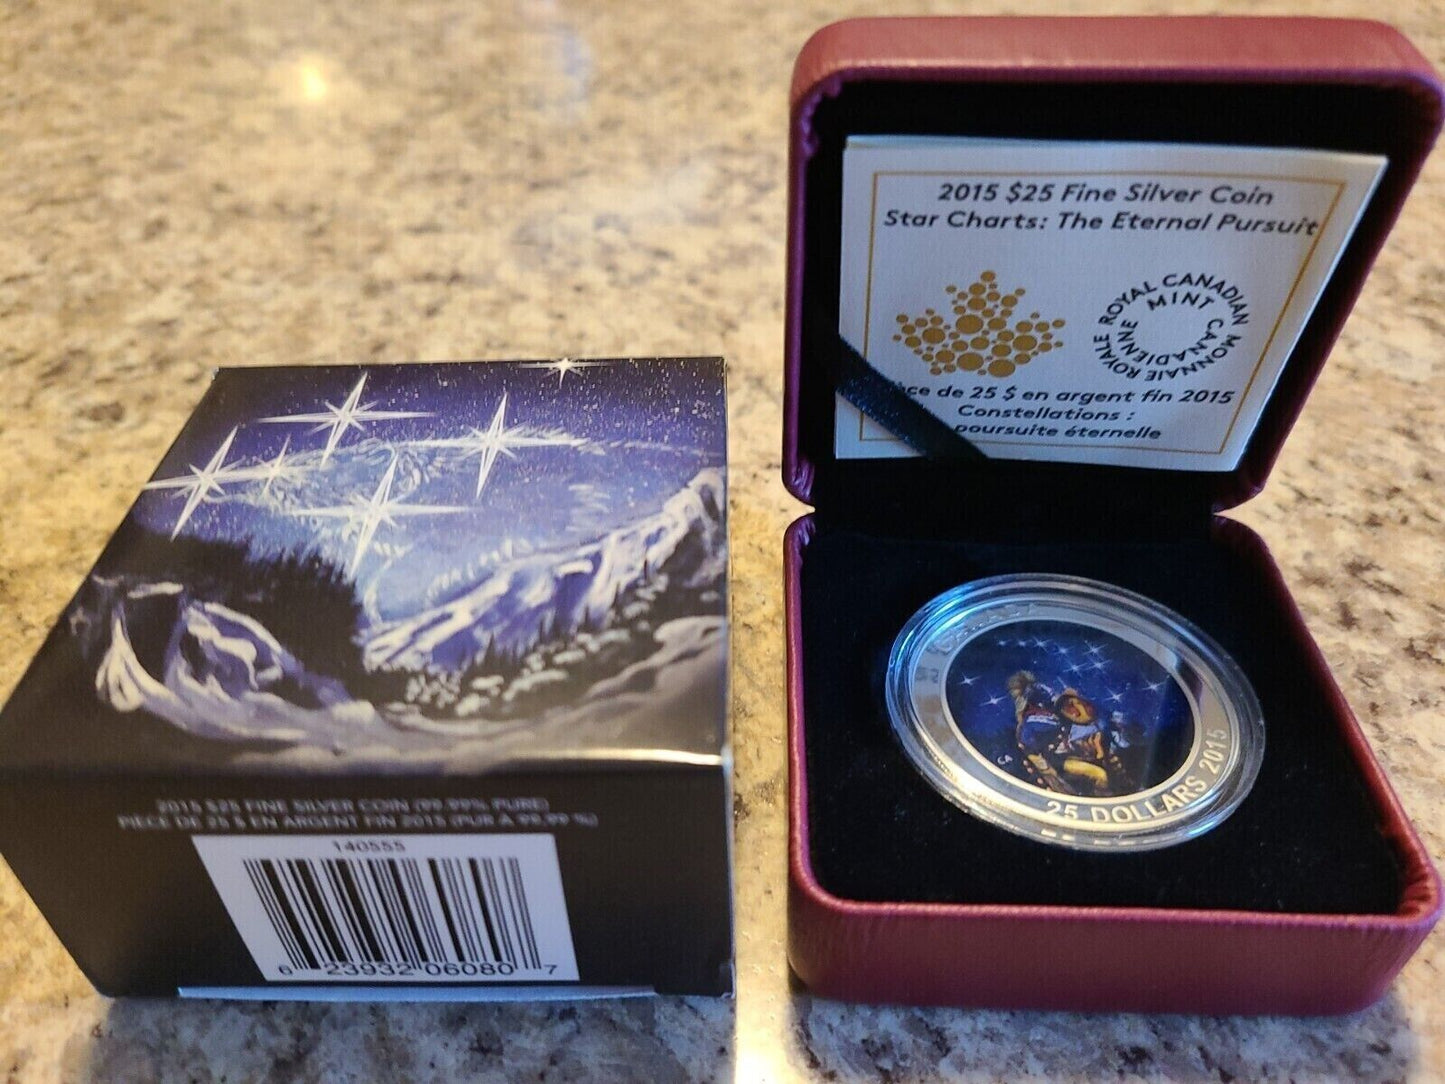 1 oz Silver Coin 2015 Canada $25 Star Charts - The Quest Glow in the Dark